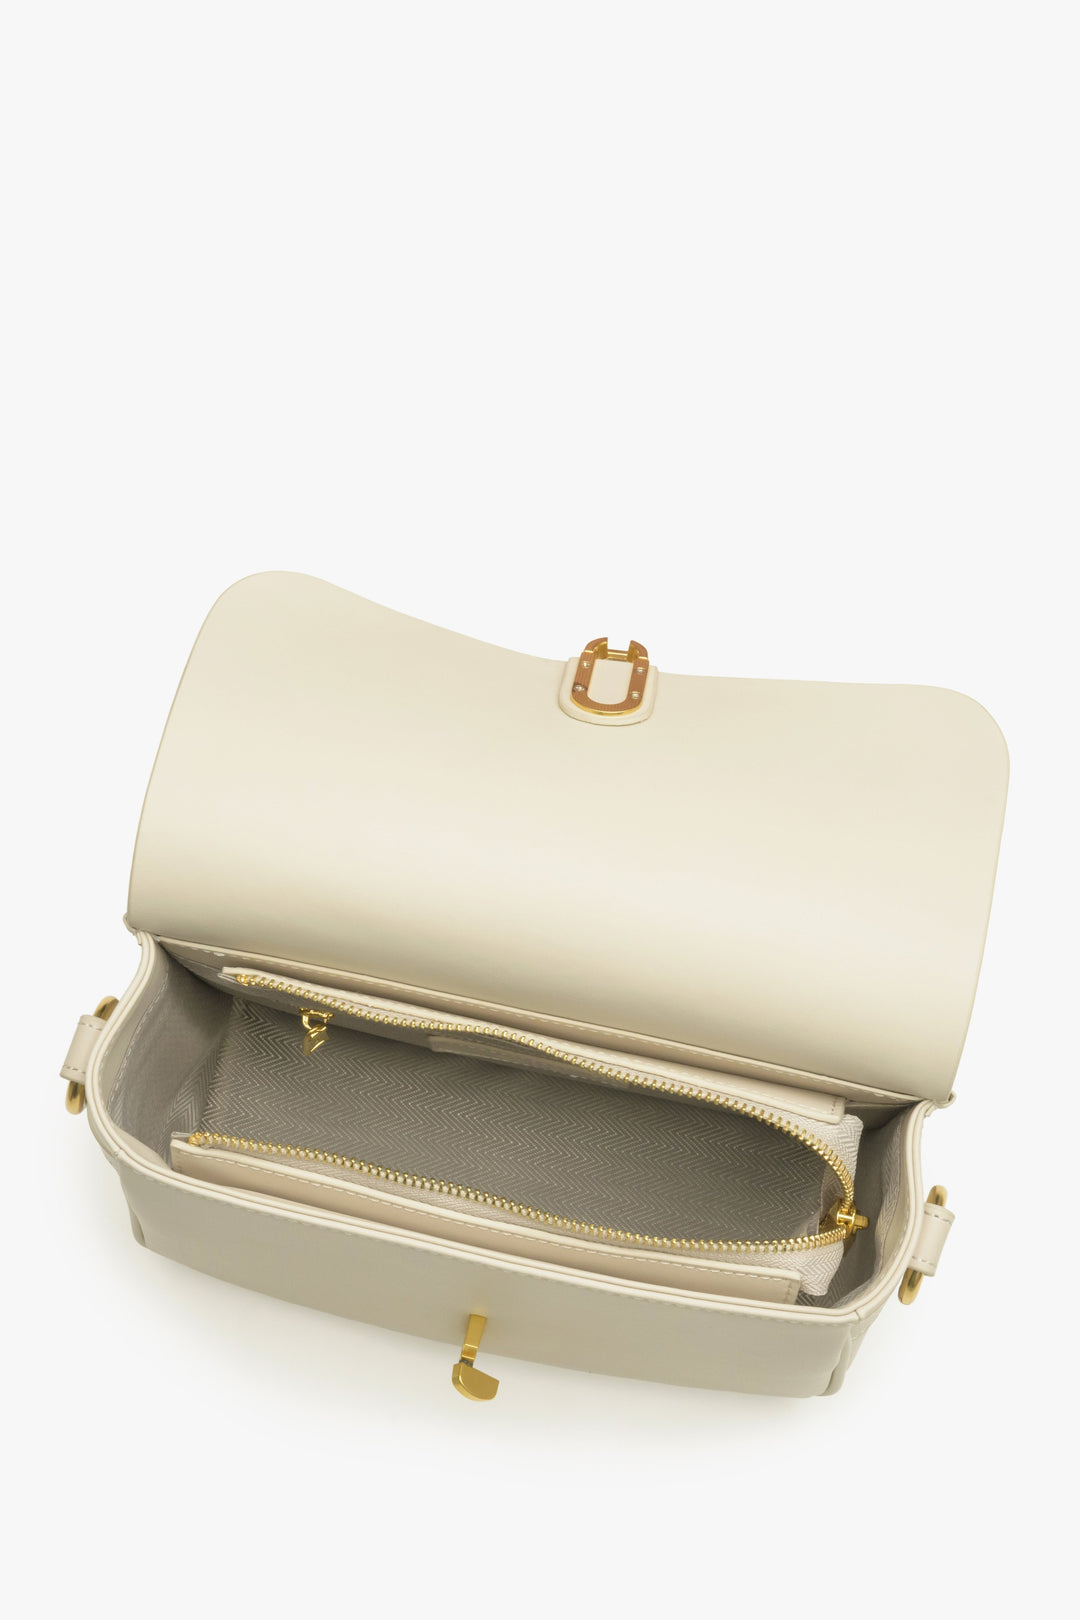 Women's handbag in light beige made of genuine leather by Estro - close-up on the interior view.